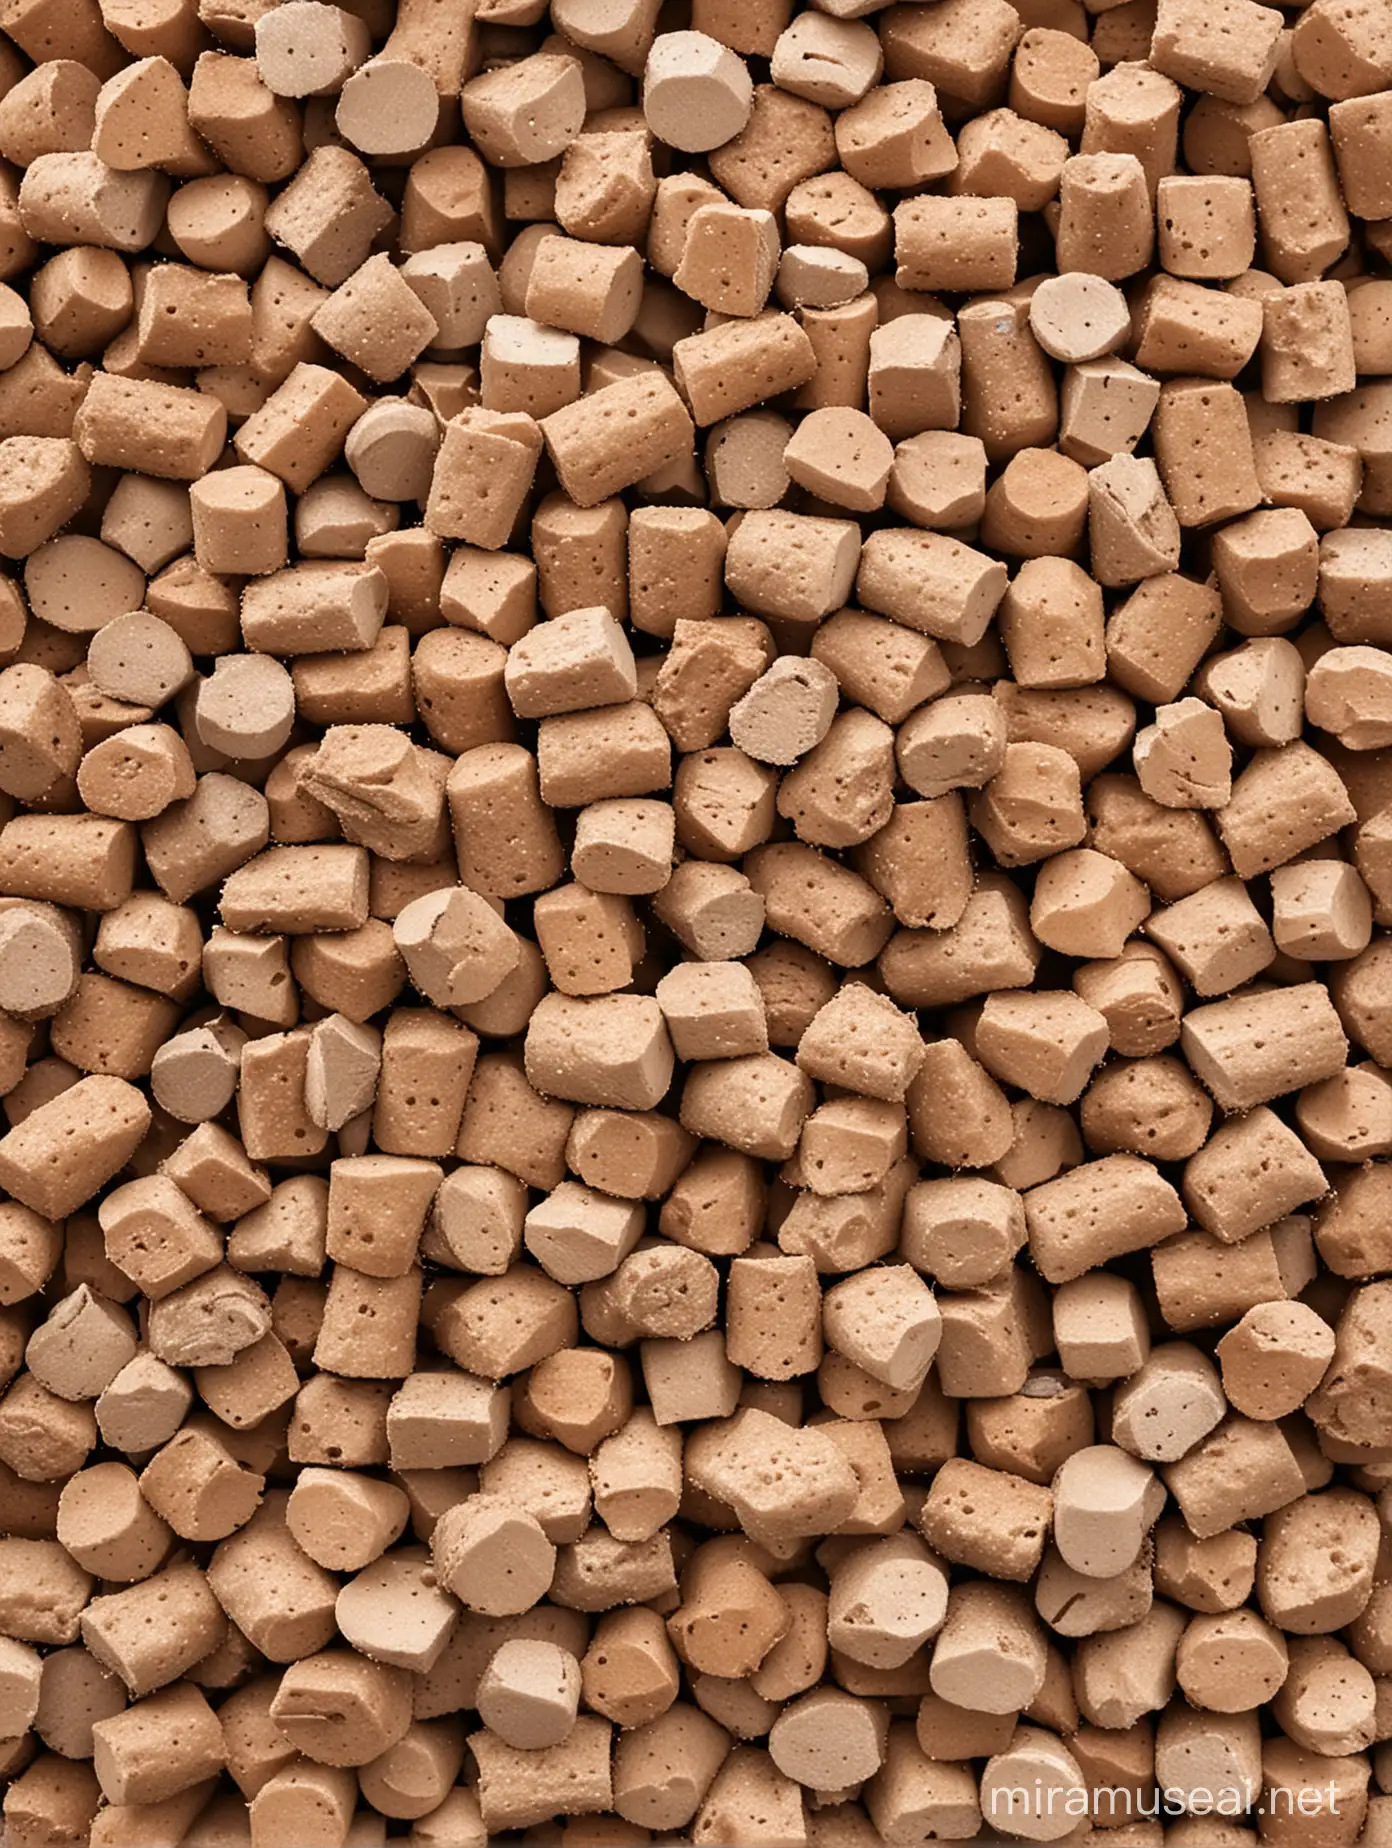 EcoFriendly Home Heating with Briquettes and Pellets